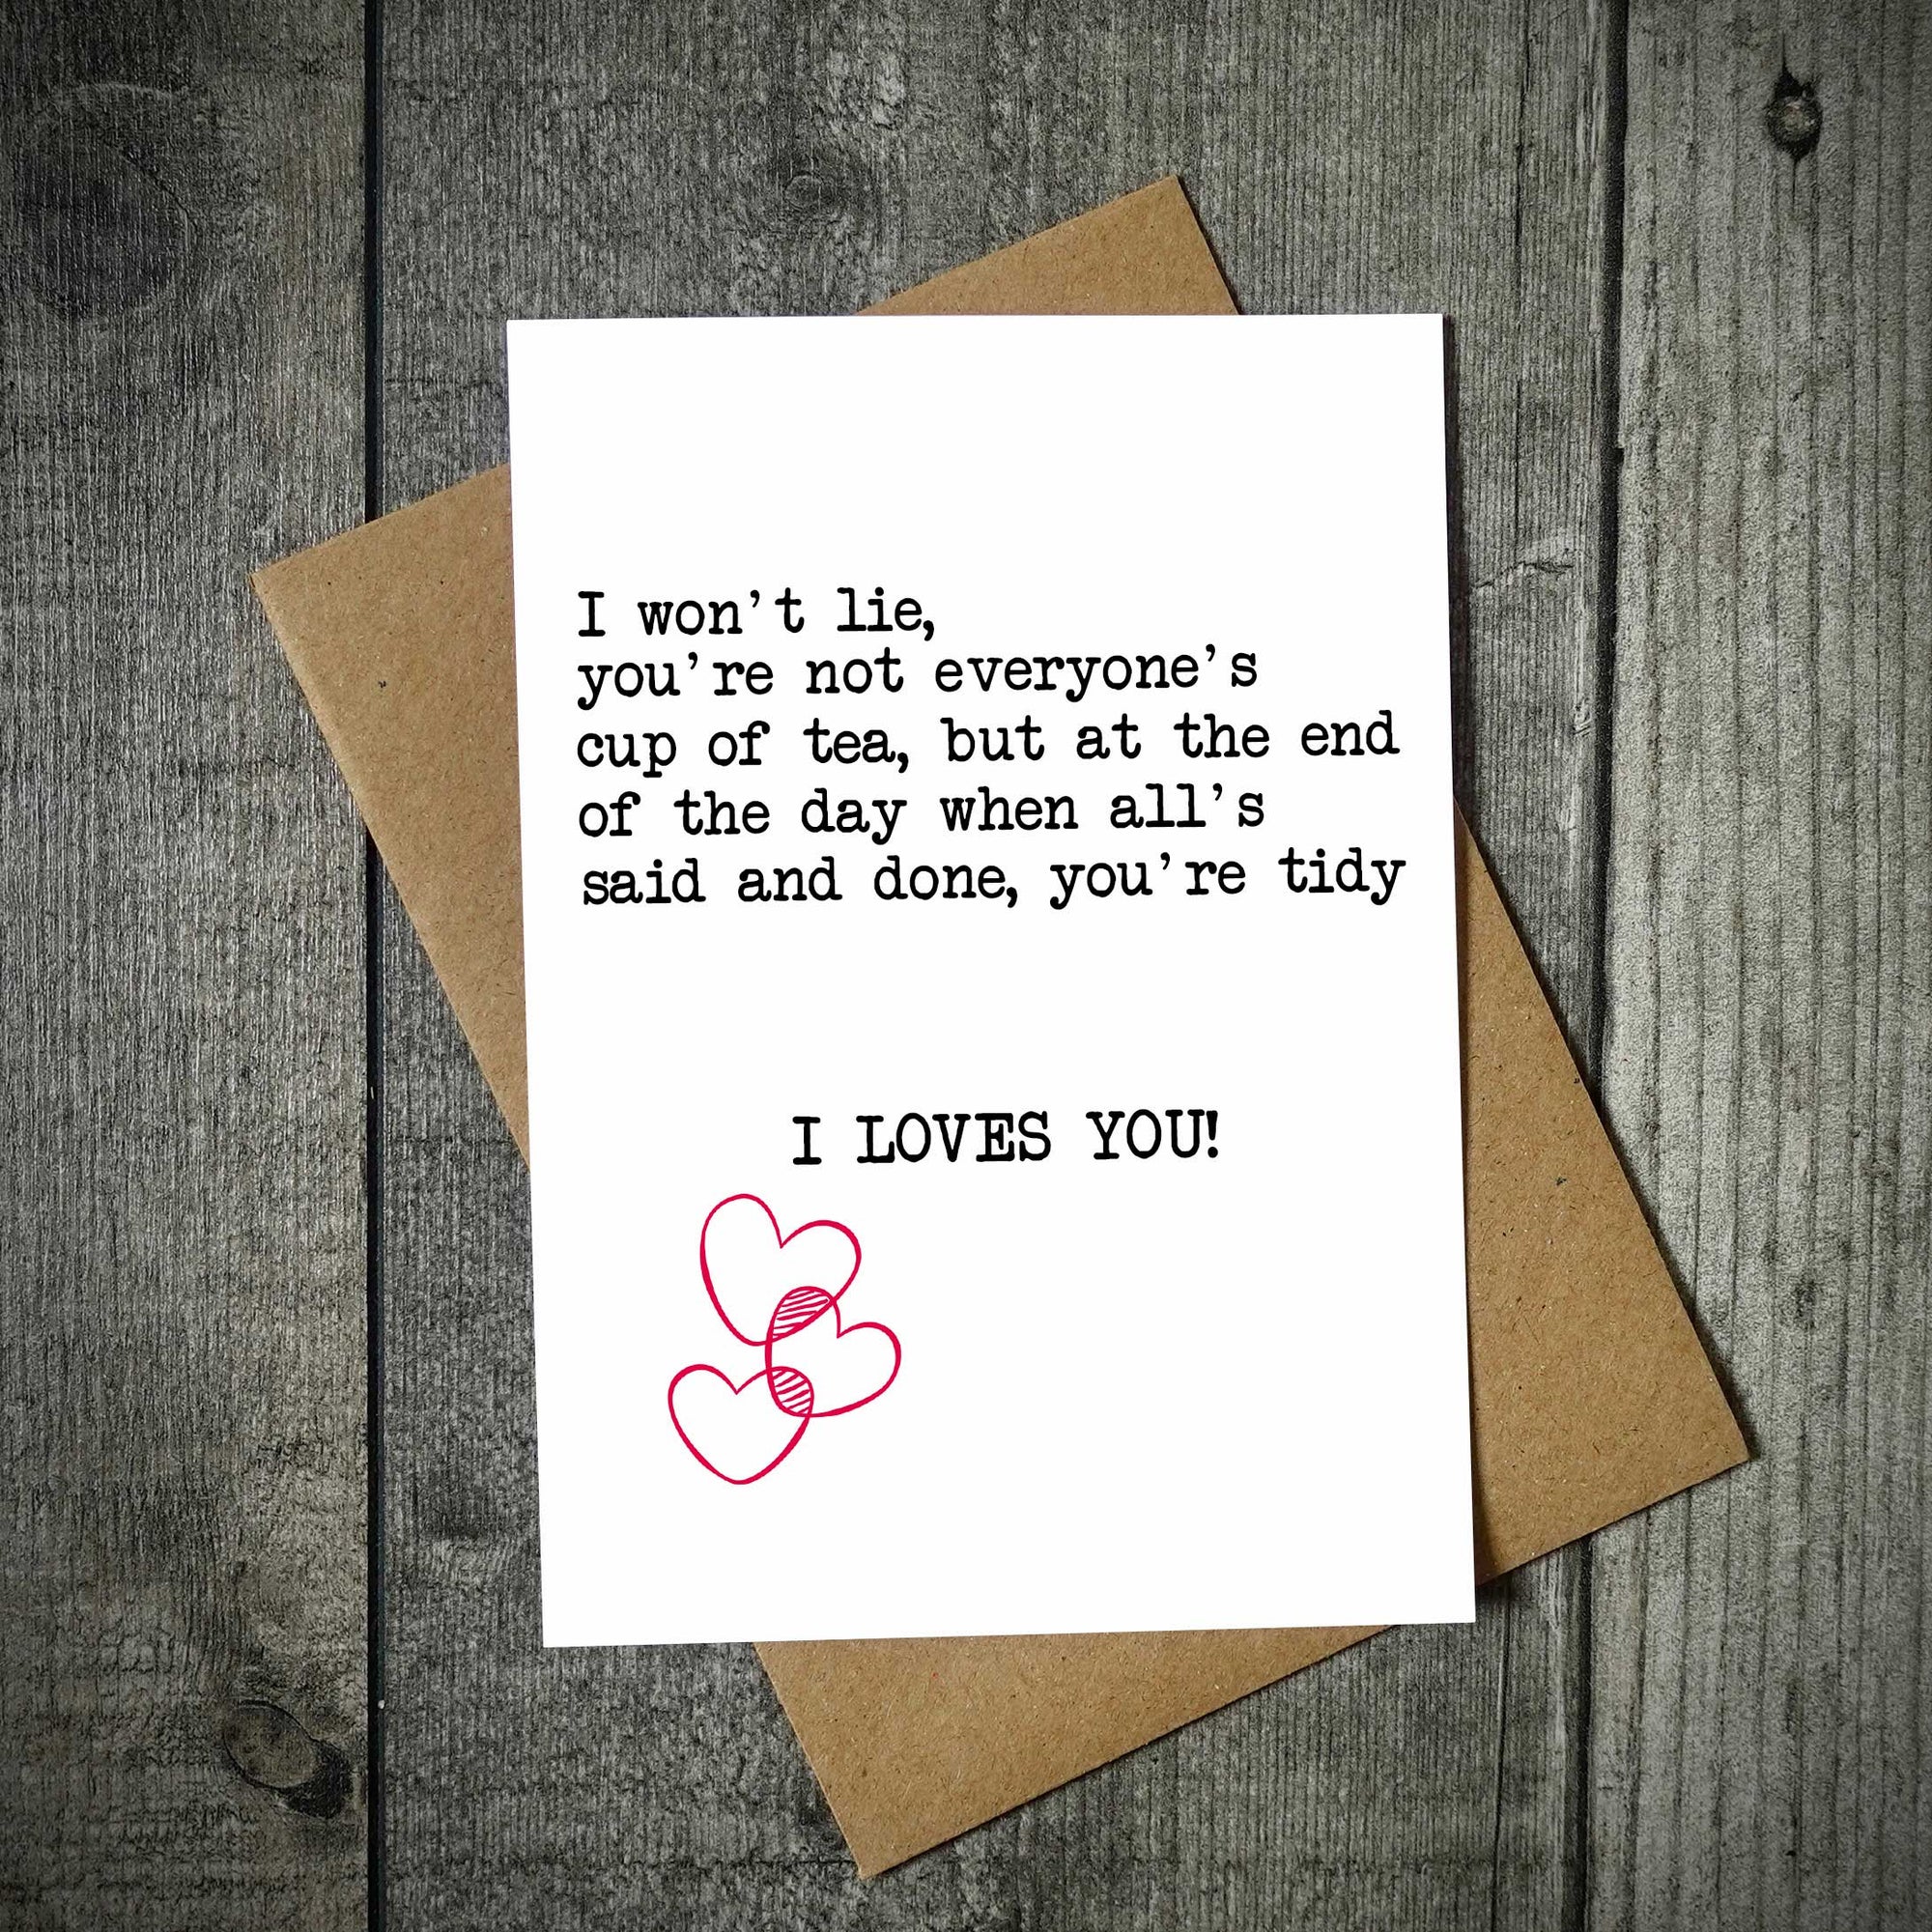 I Loves You Gavin & Stacey Quote Funny Valentine's Card